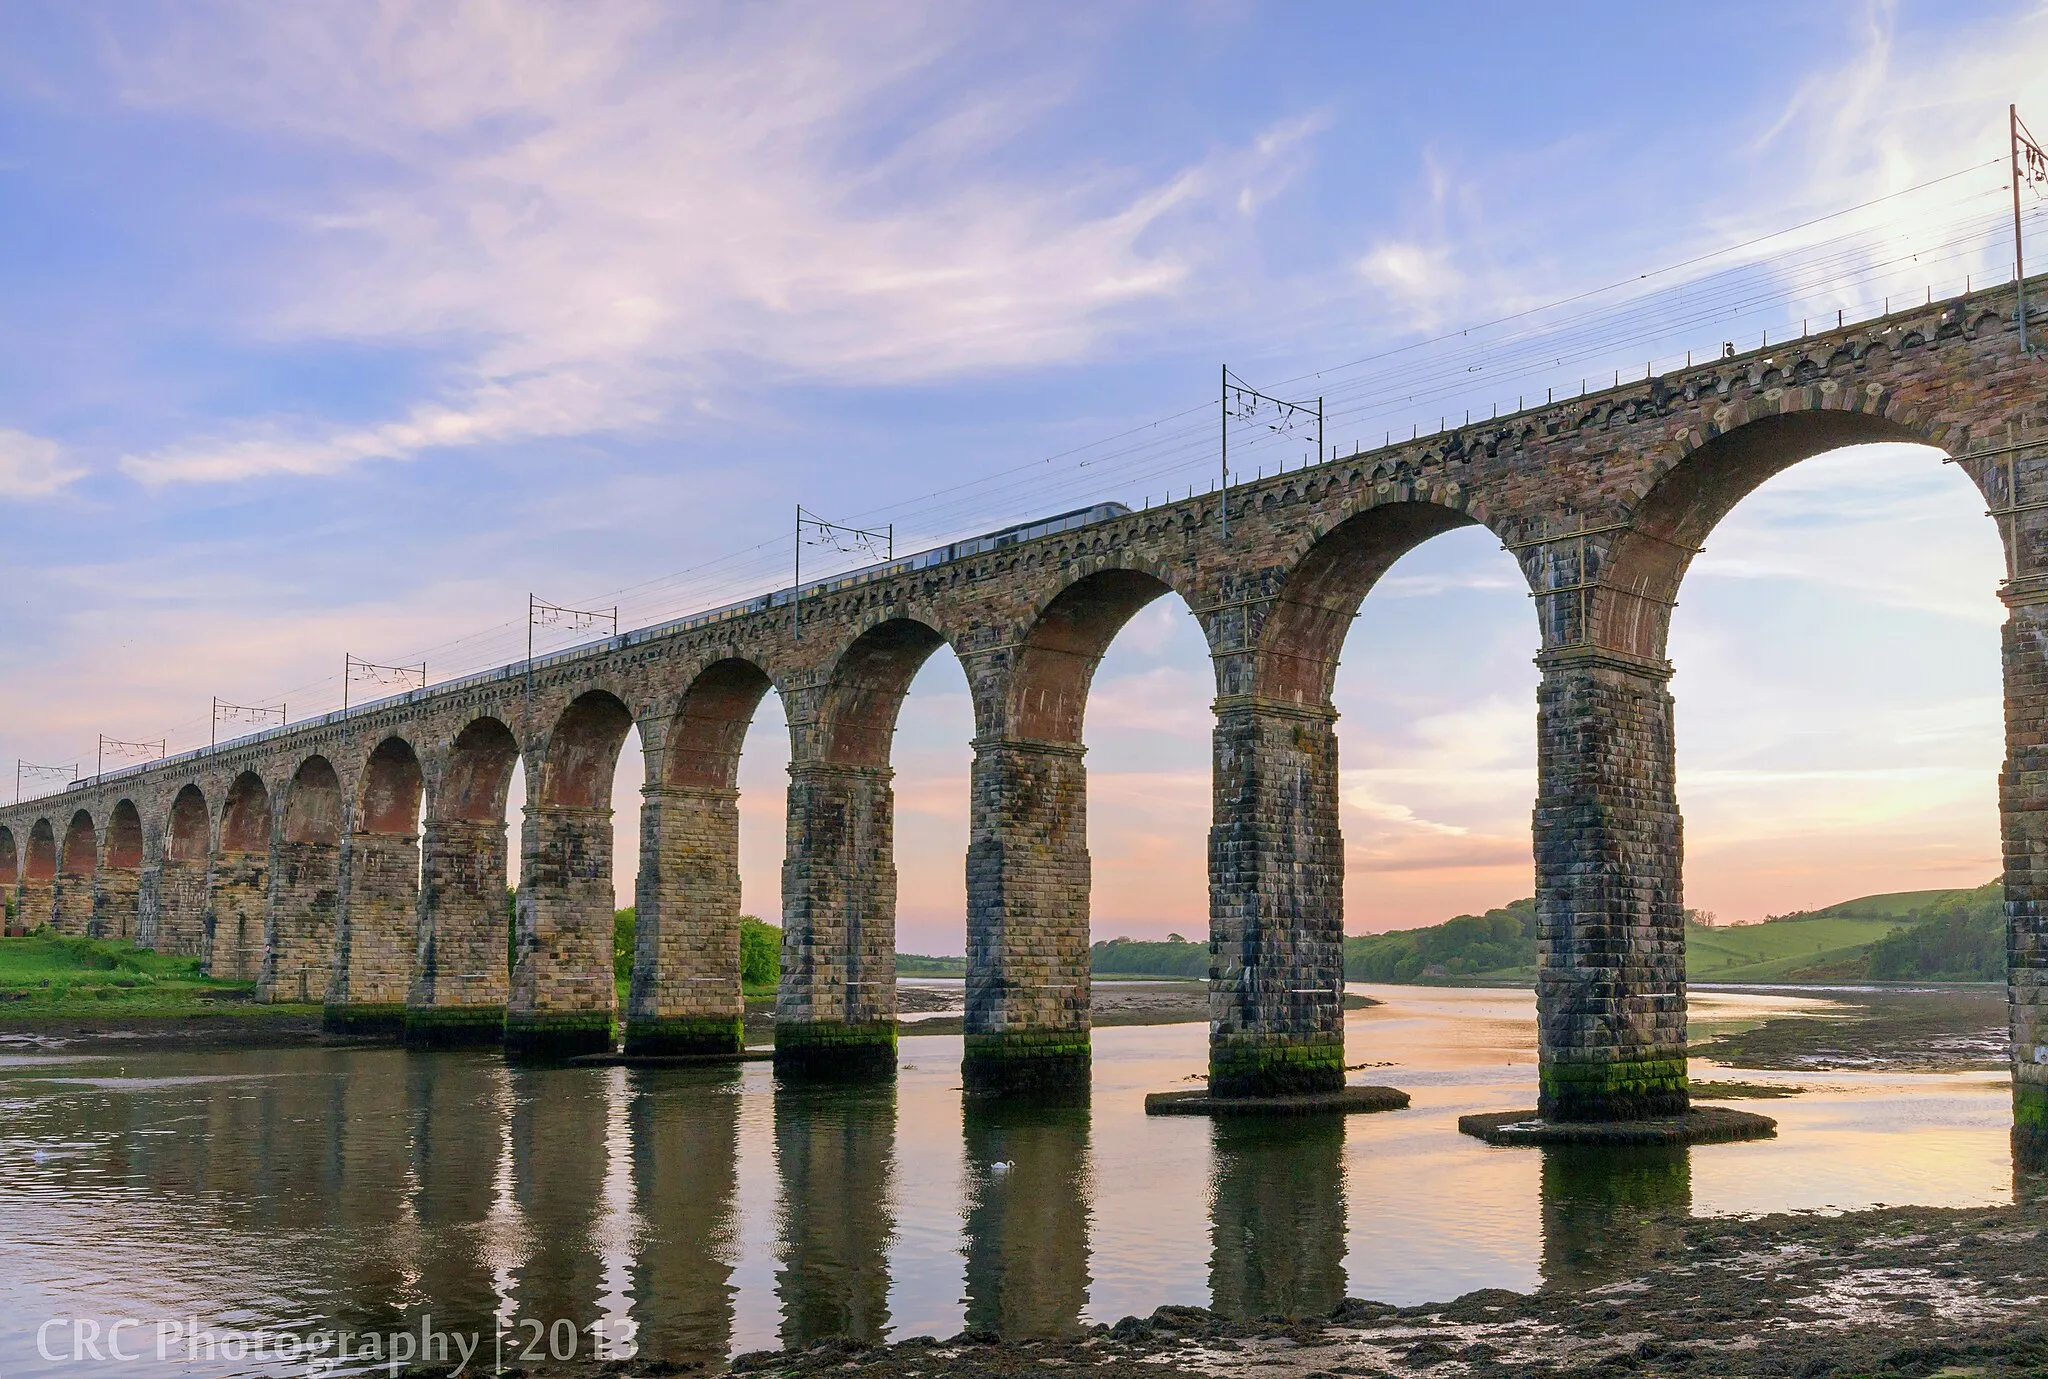 Photo showing: The famous old bridge in my home town of Berwick upon Tweed, taken just as the sun was setting.